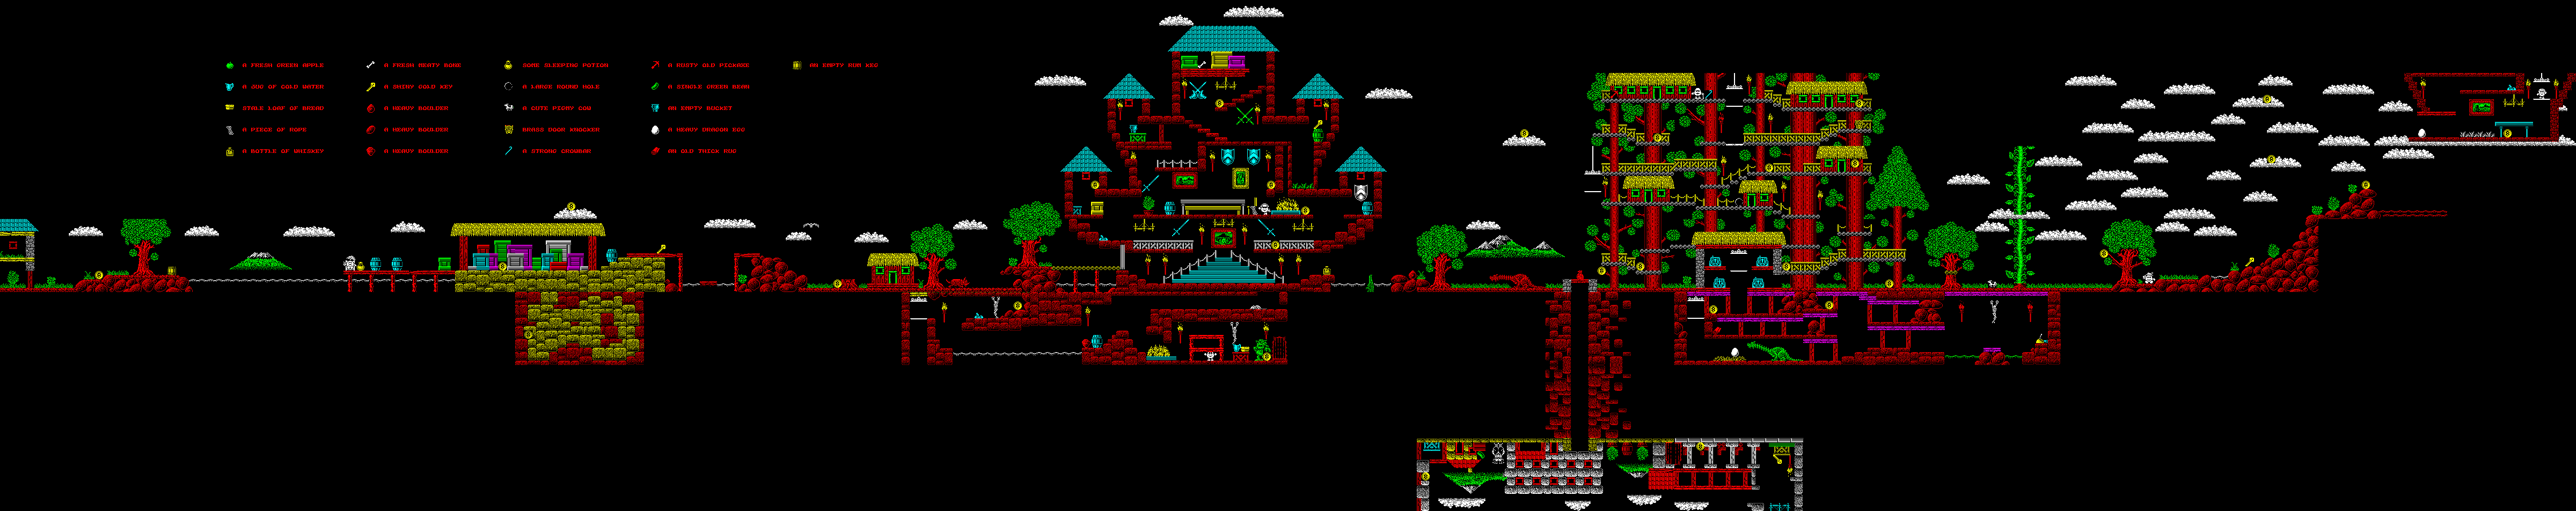 Fantasy World Dizzy - Extended Edition 2023 - The Map